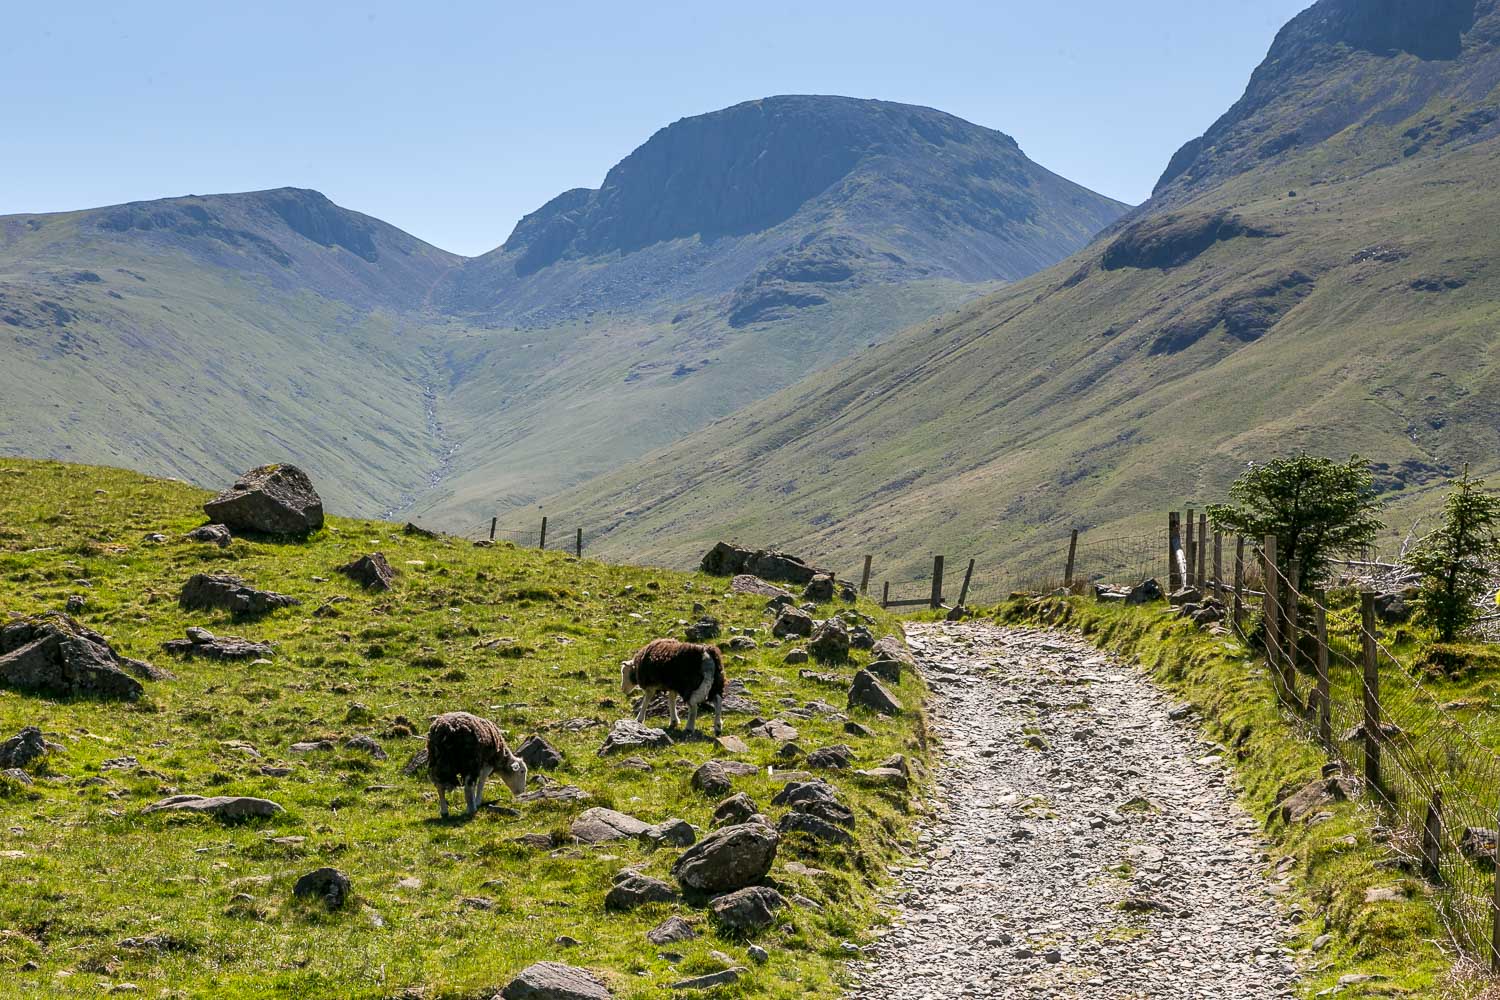 Buttermere to Wasdale walk, Great Gable